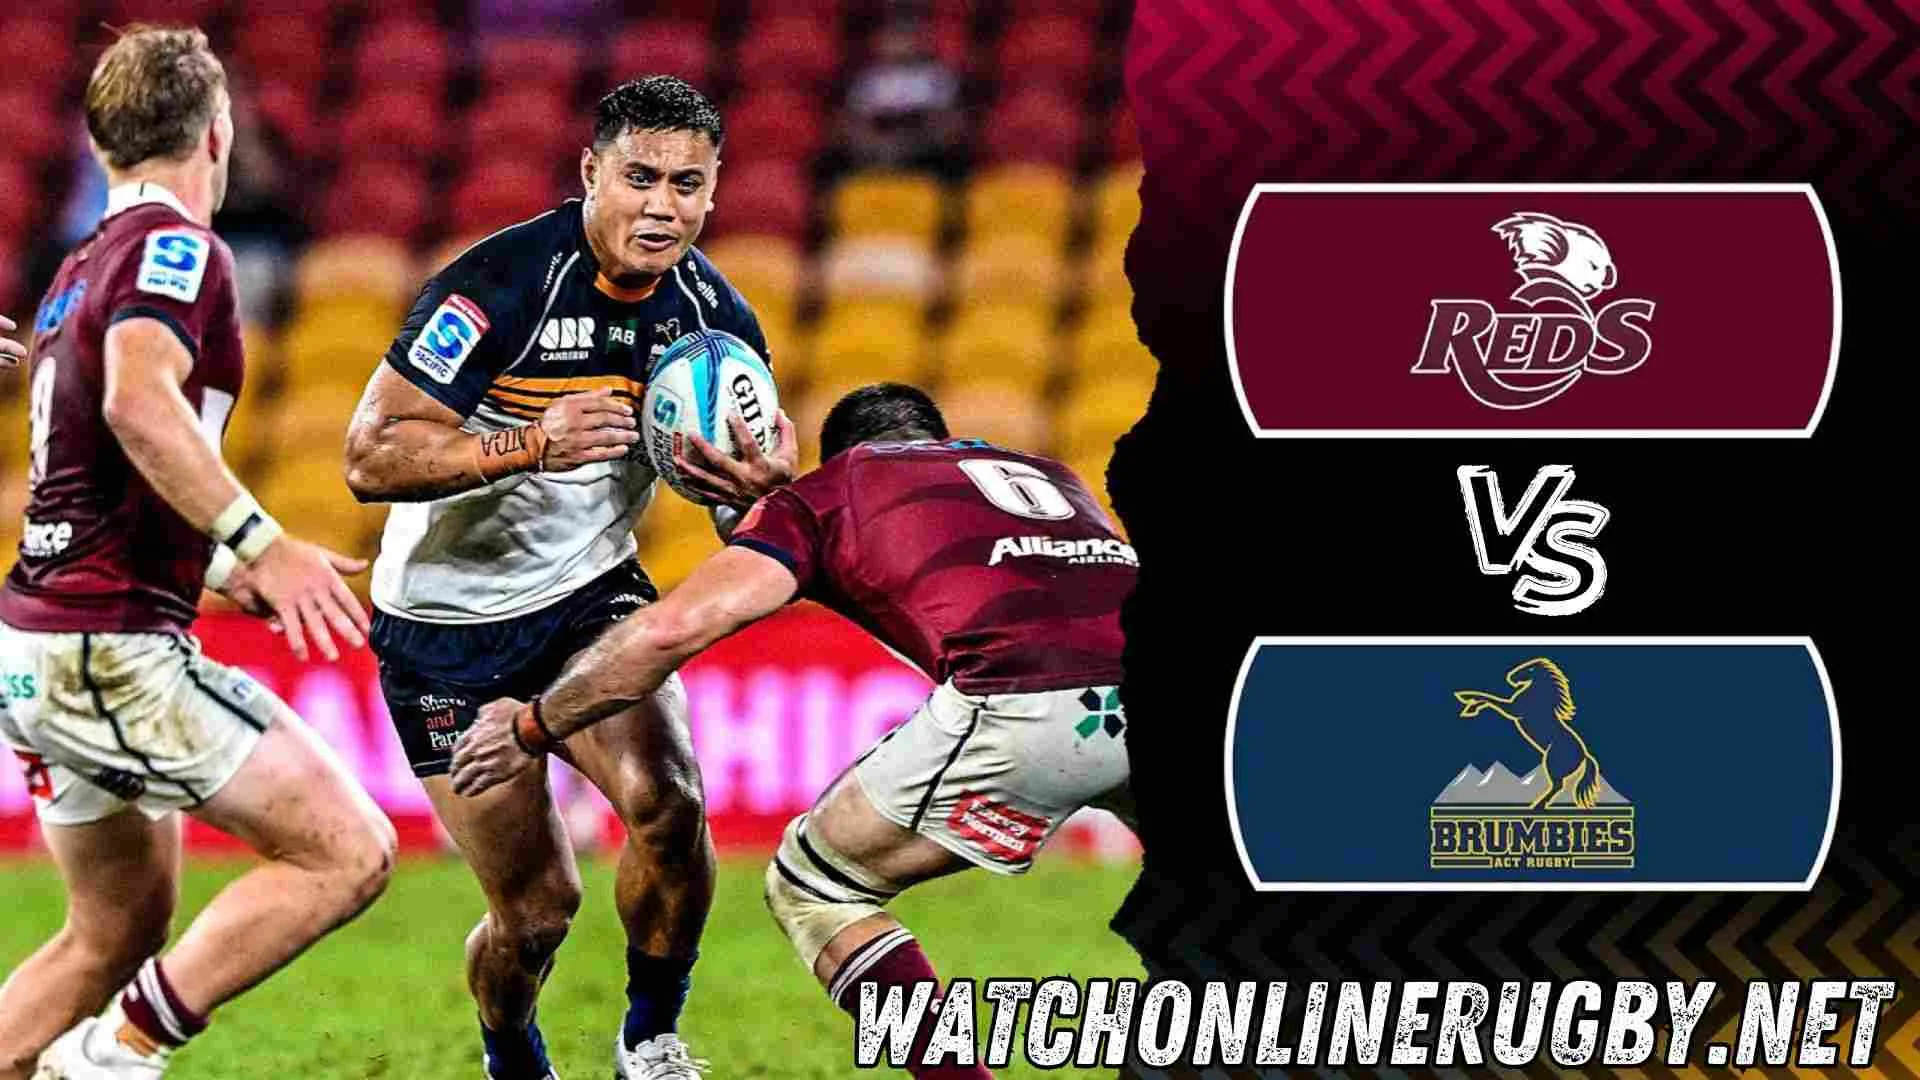 Brumbies Vs Reds Live Streaming